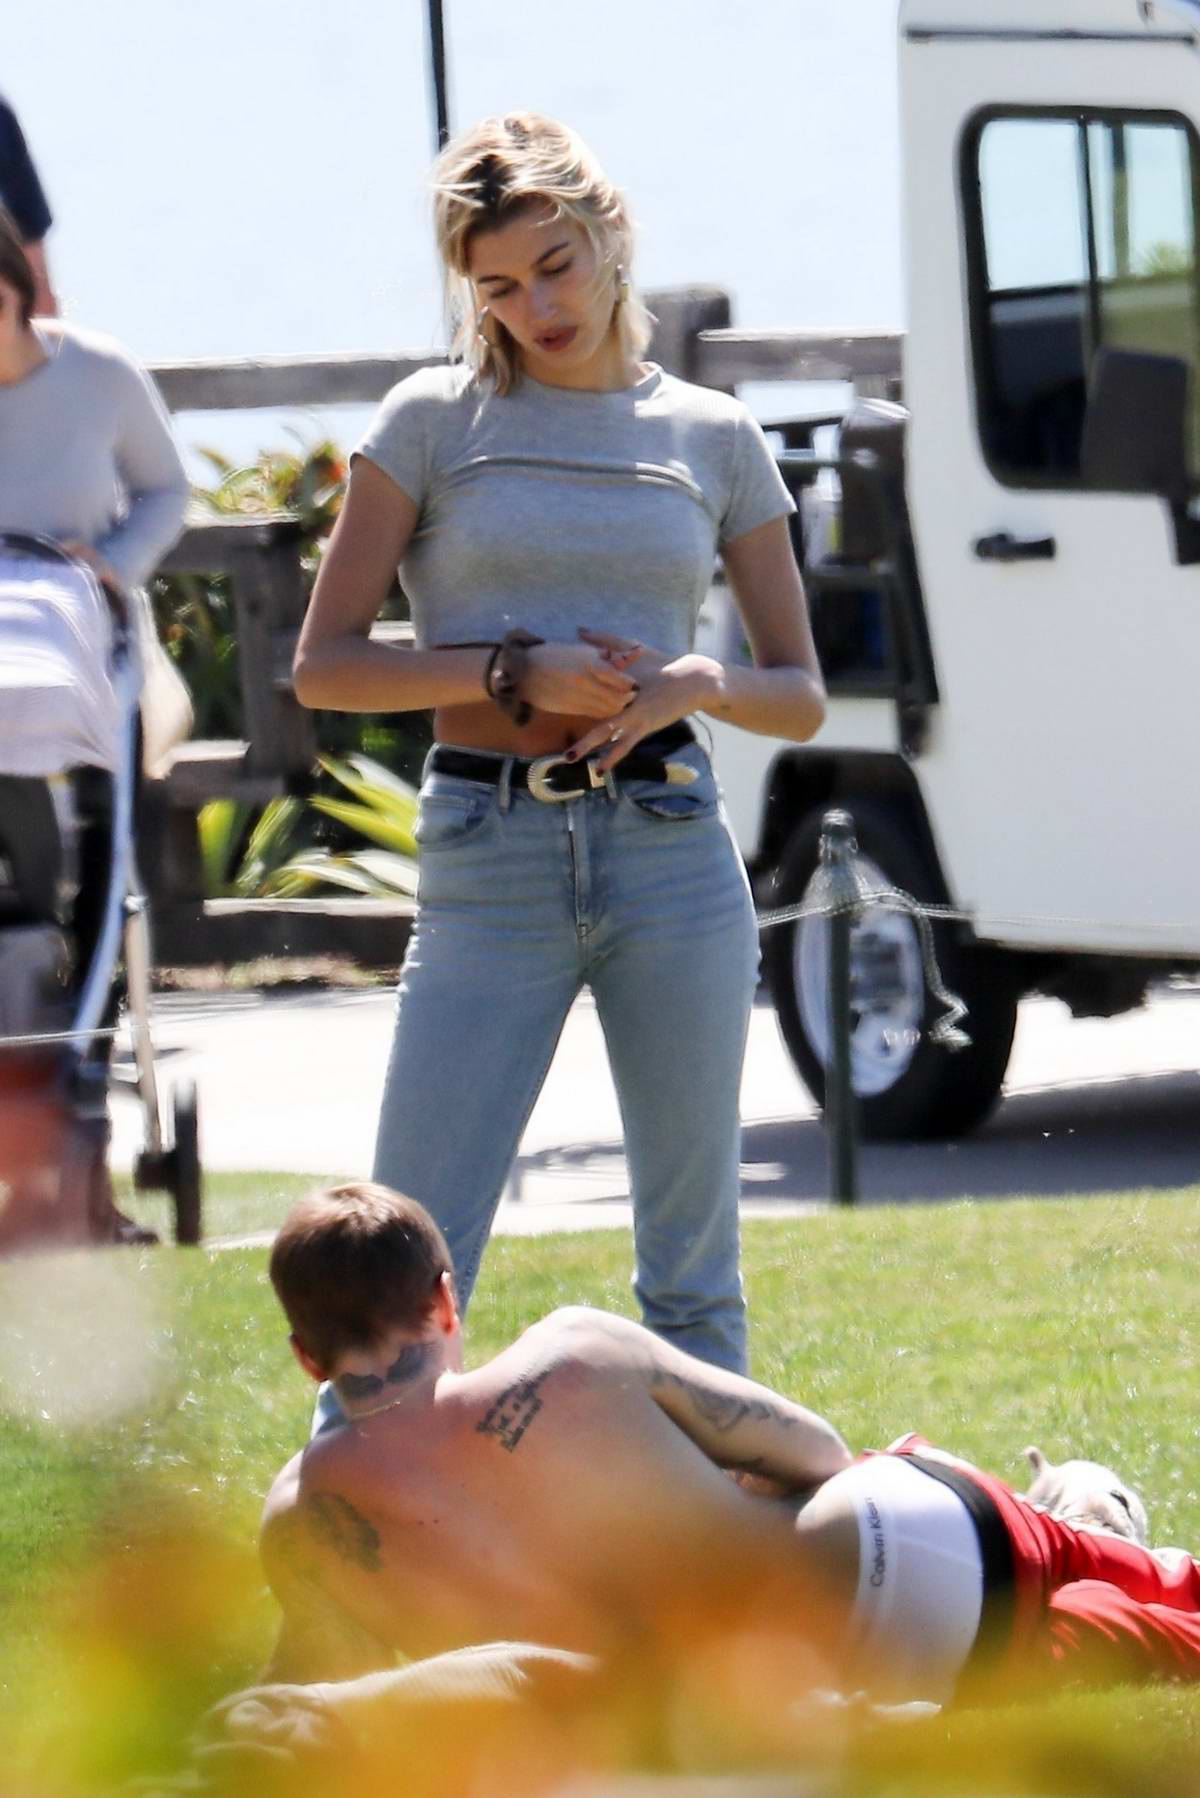 Hailey Baldwin And Justin Bieber Share A Very Intimate Moment While Out At Newport Beach